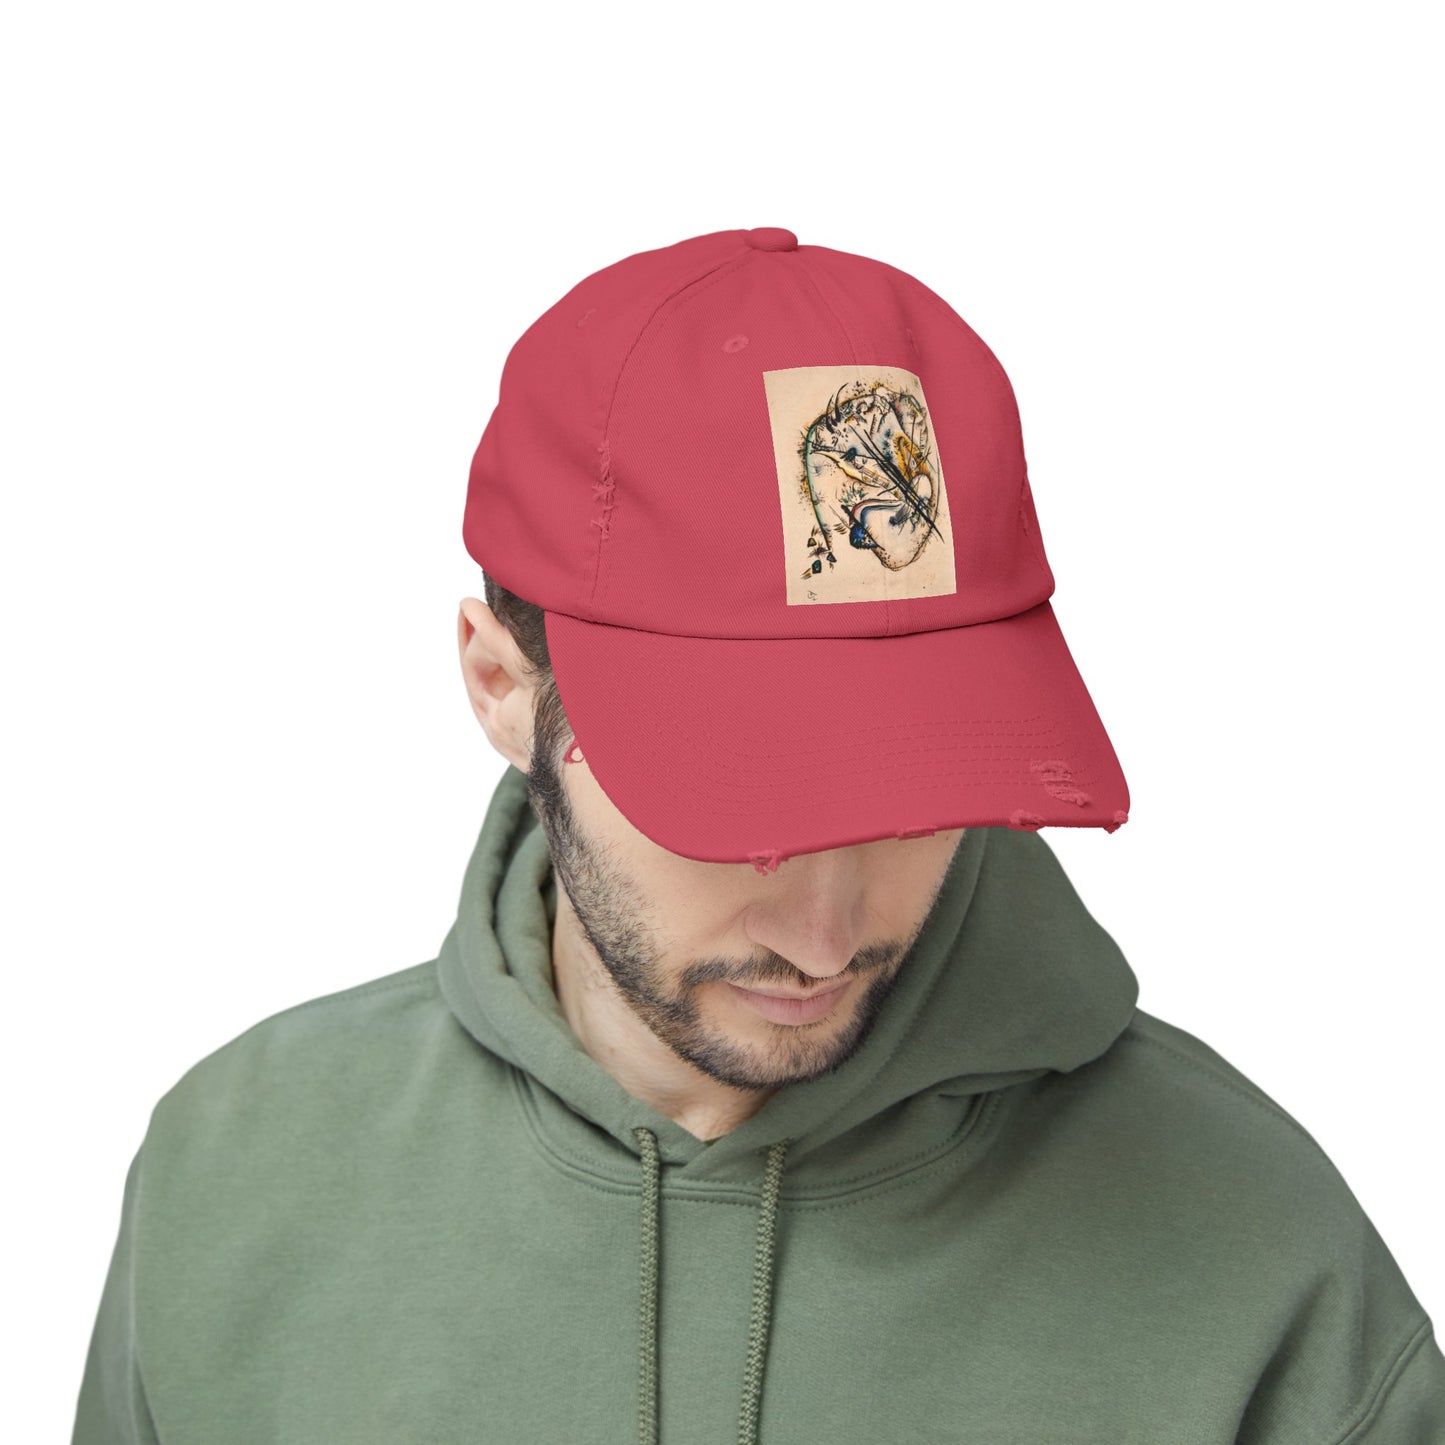 a man wearing a red hat with a picture of a tiger on it